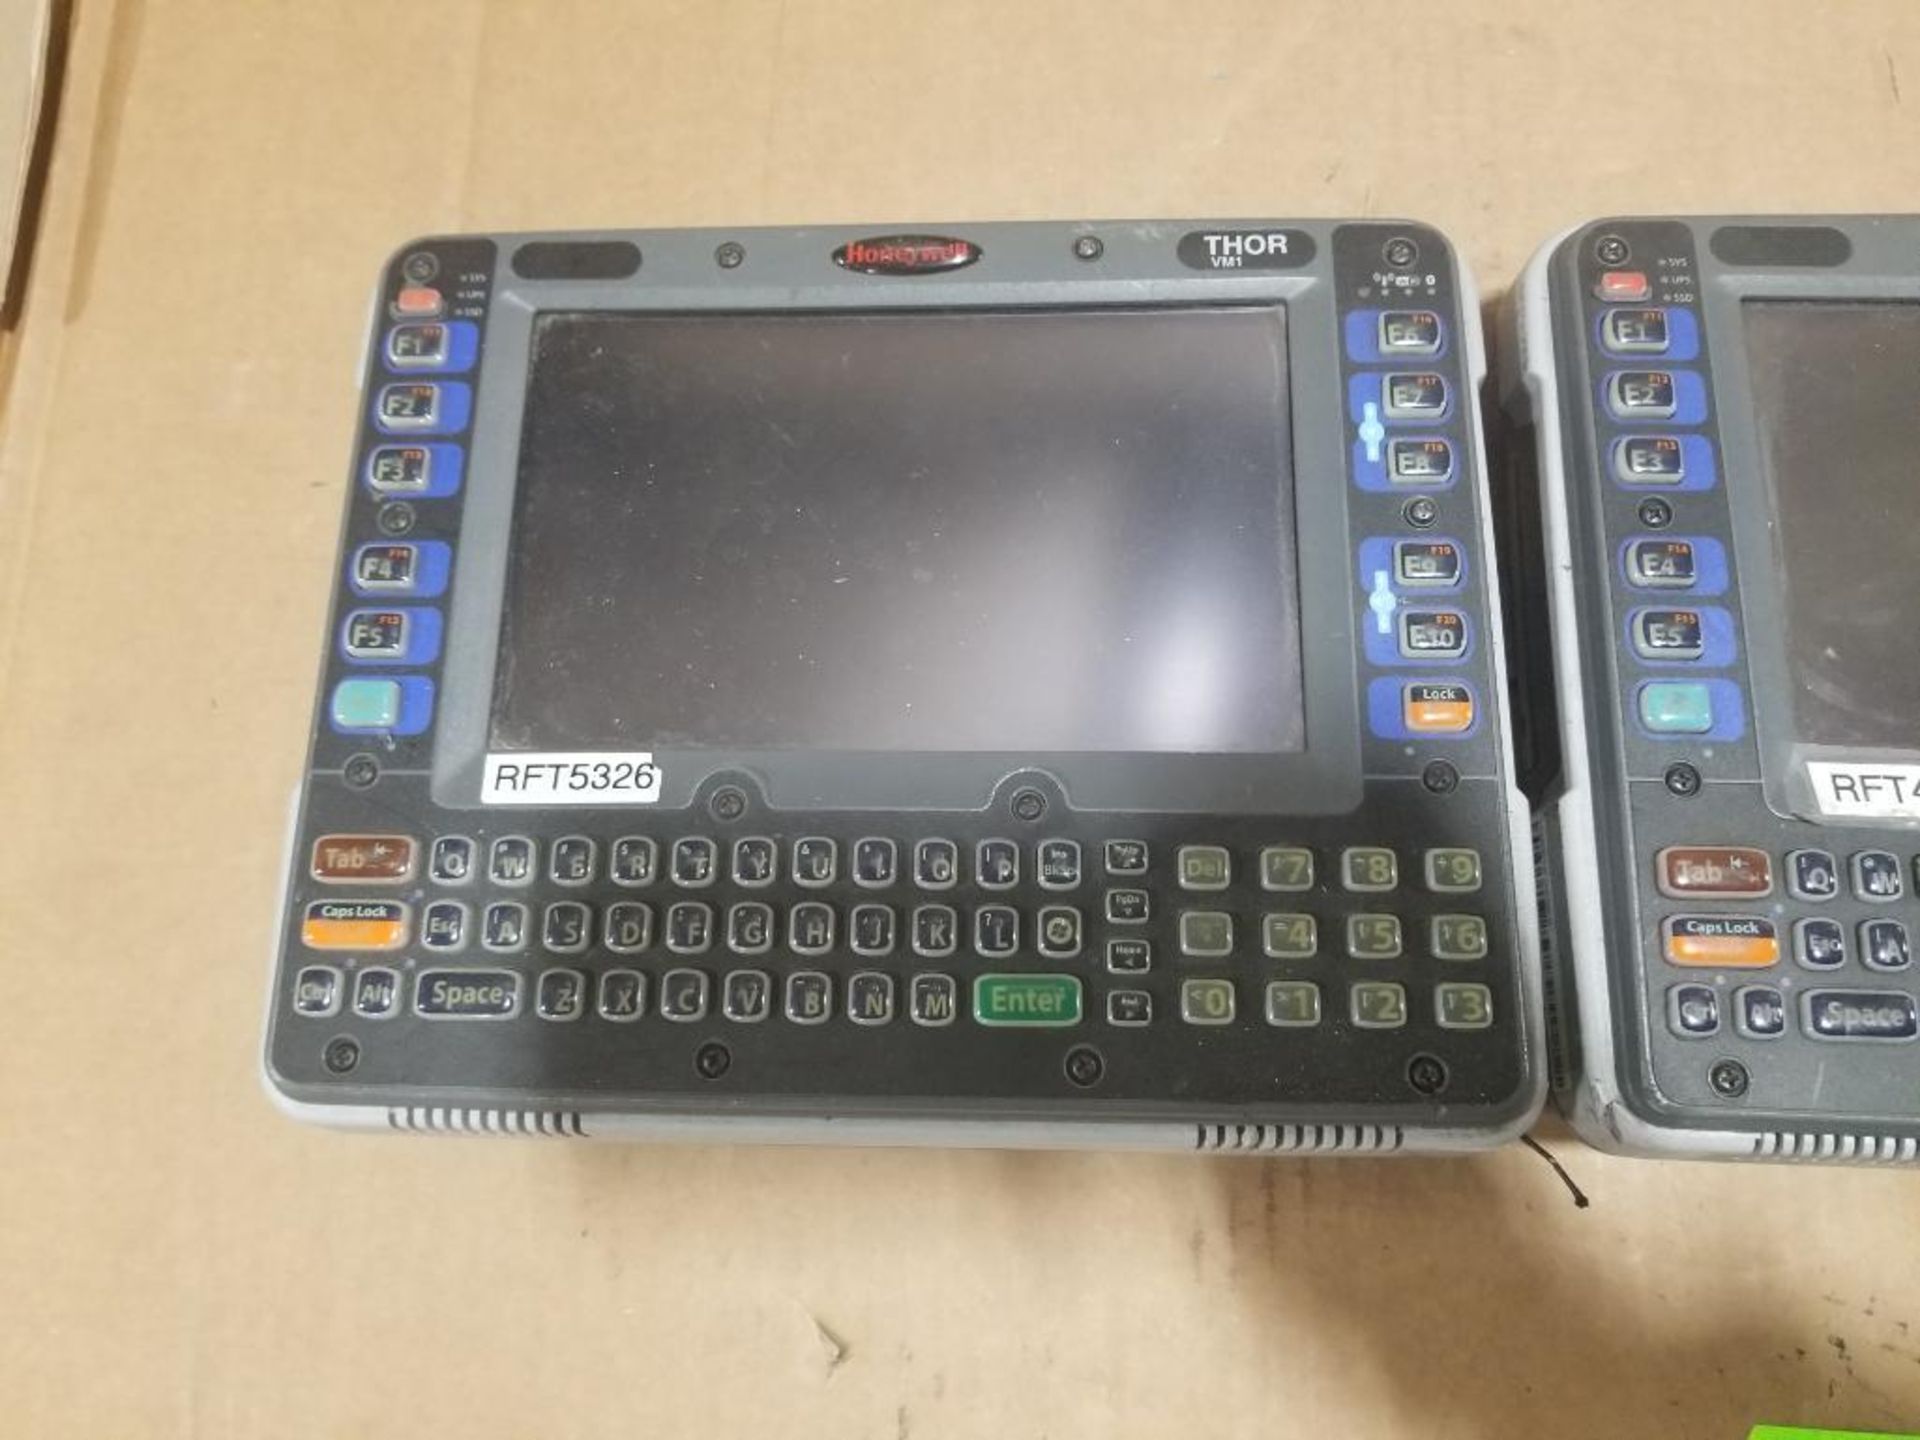 Qty 2 - Honeywell mobile computers. Model Thor VM1. - Image 4 of 5